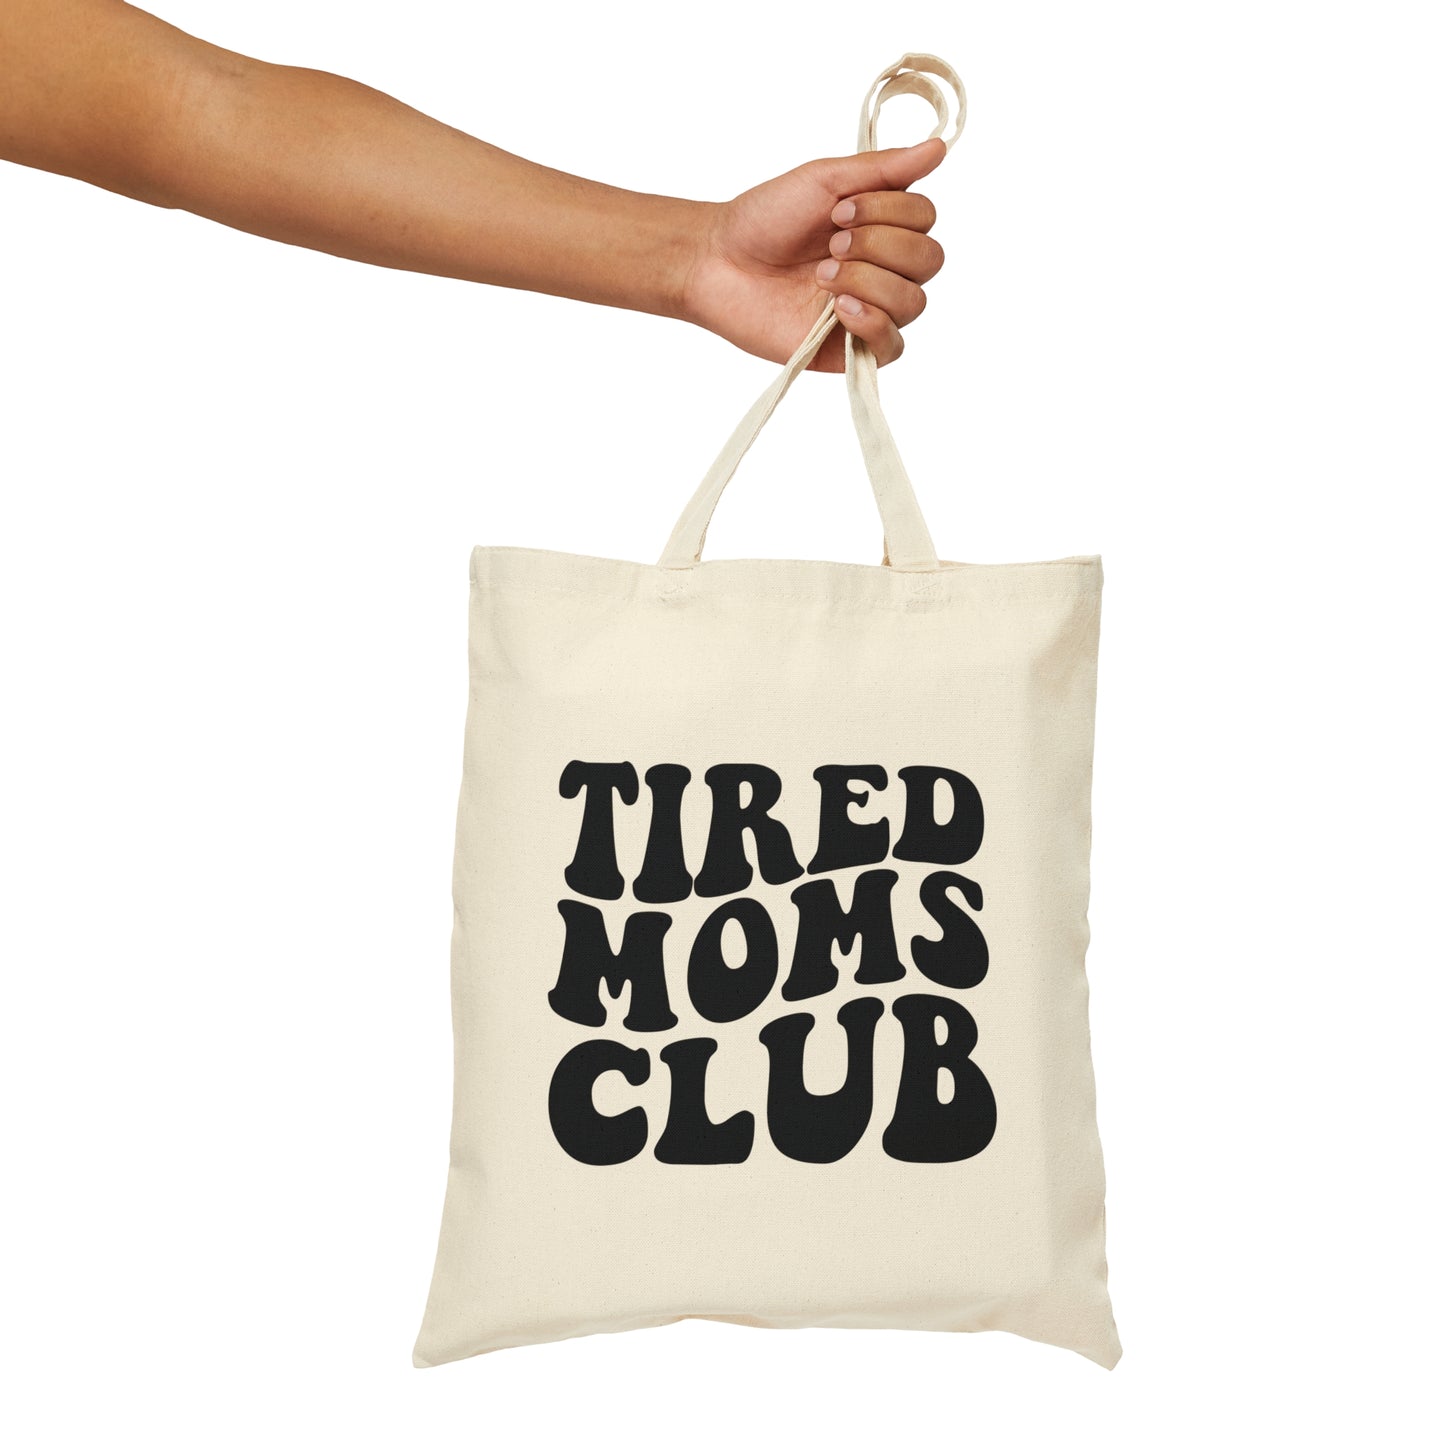 Tired Moms Club Canvas Tote Bag